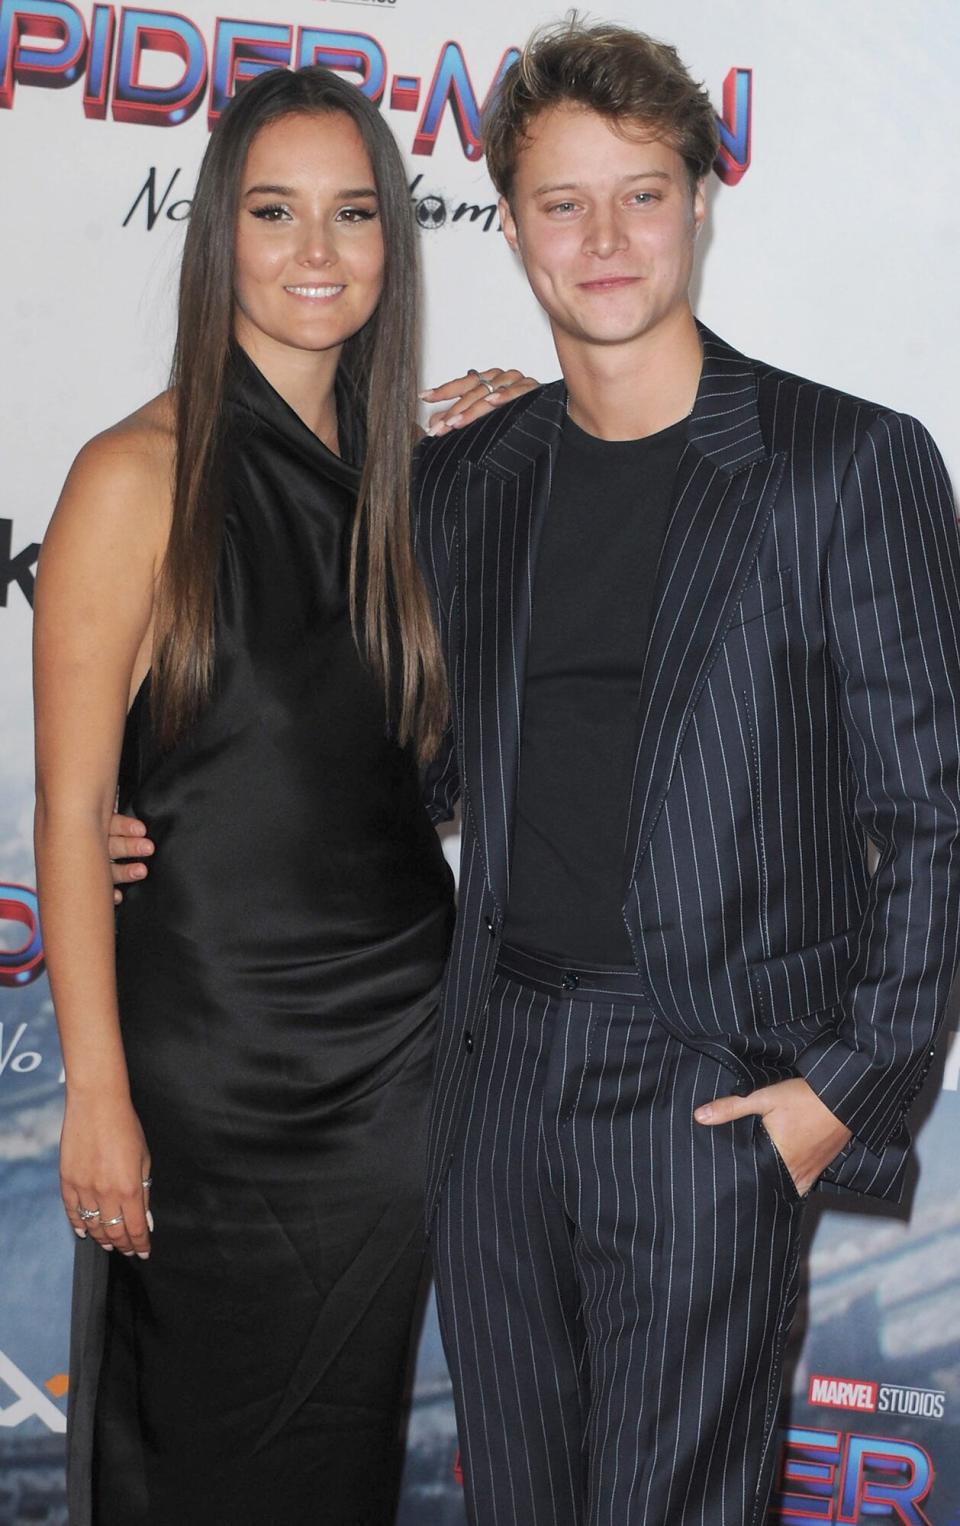 Rudy Pankow and Elaine Siemek attend Sony Pictures' "Spider-Man: No Way Home" Los Angeles Premiere held at The Regency Village Theatre on December 13, 2021 in Los Angeles, California